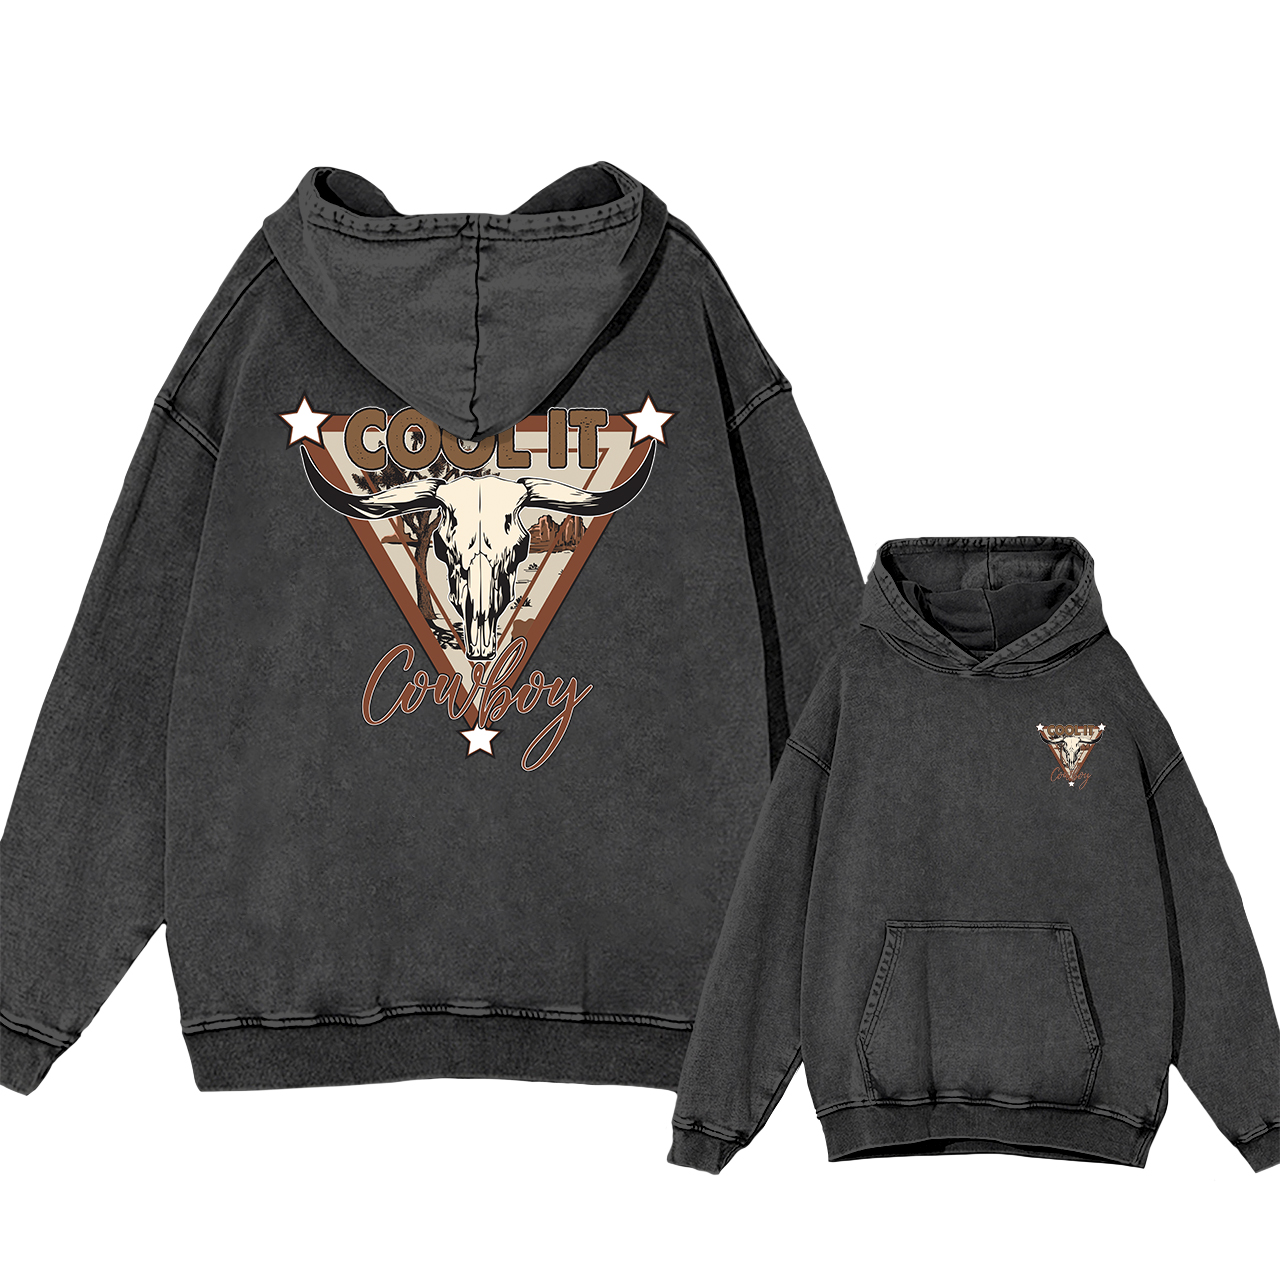 Cowboy Cool IT Mysterious Triangle Hoodies